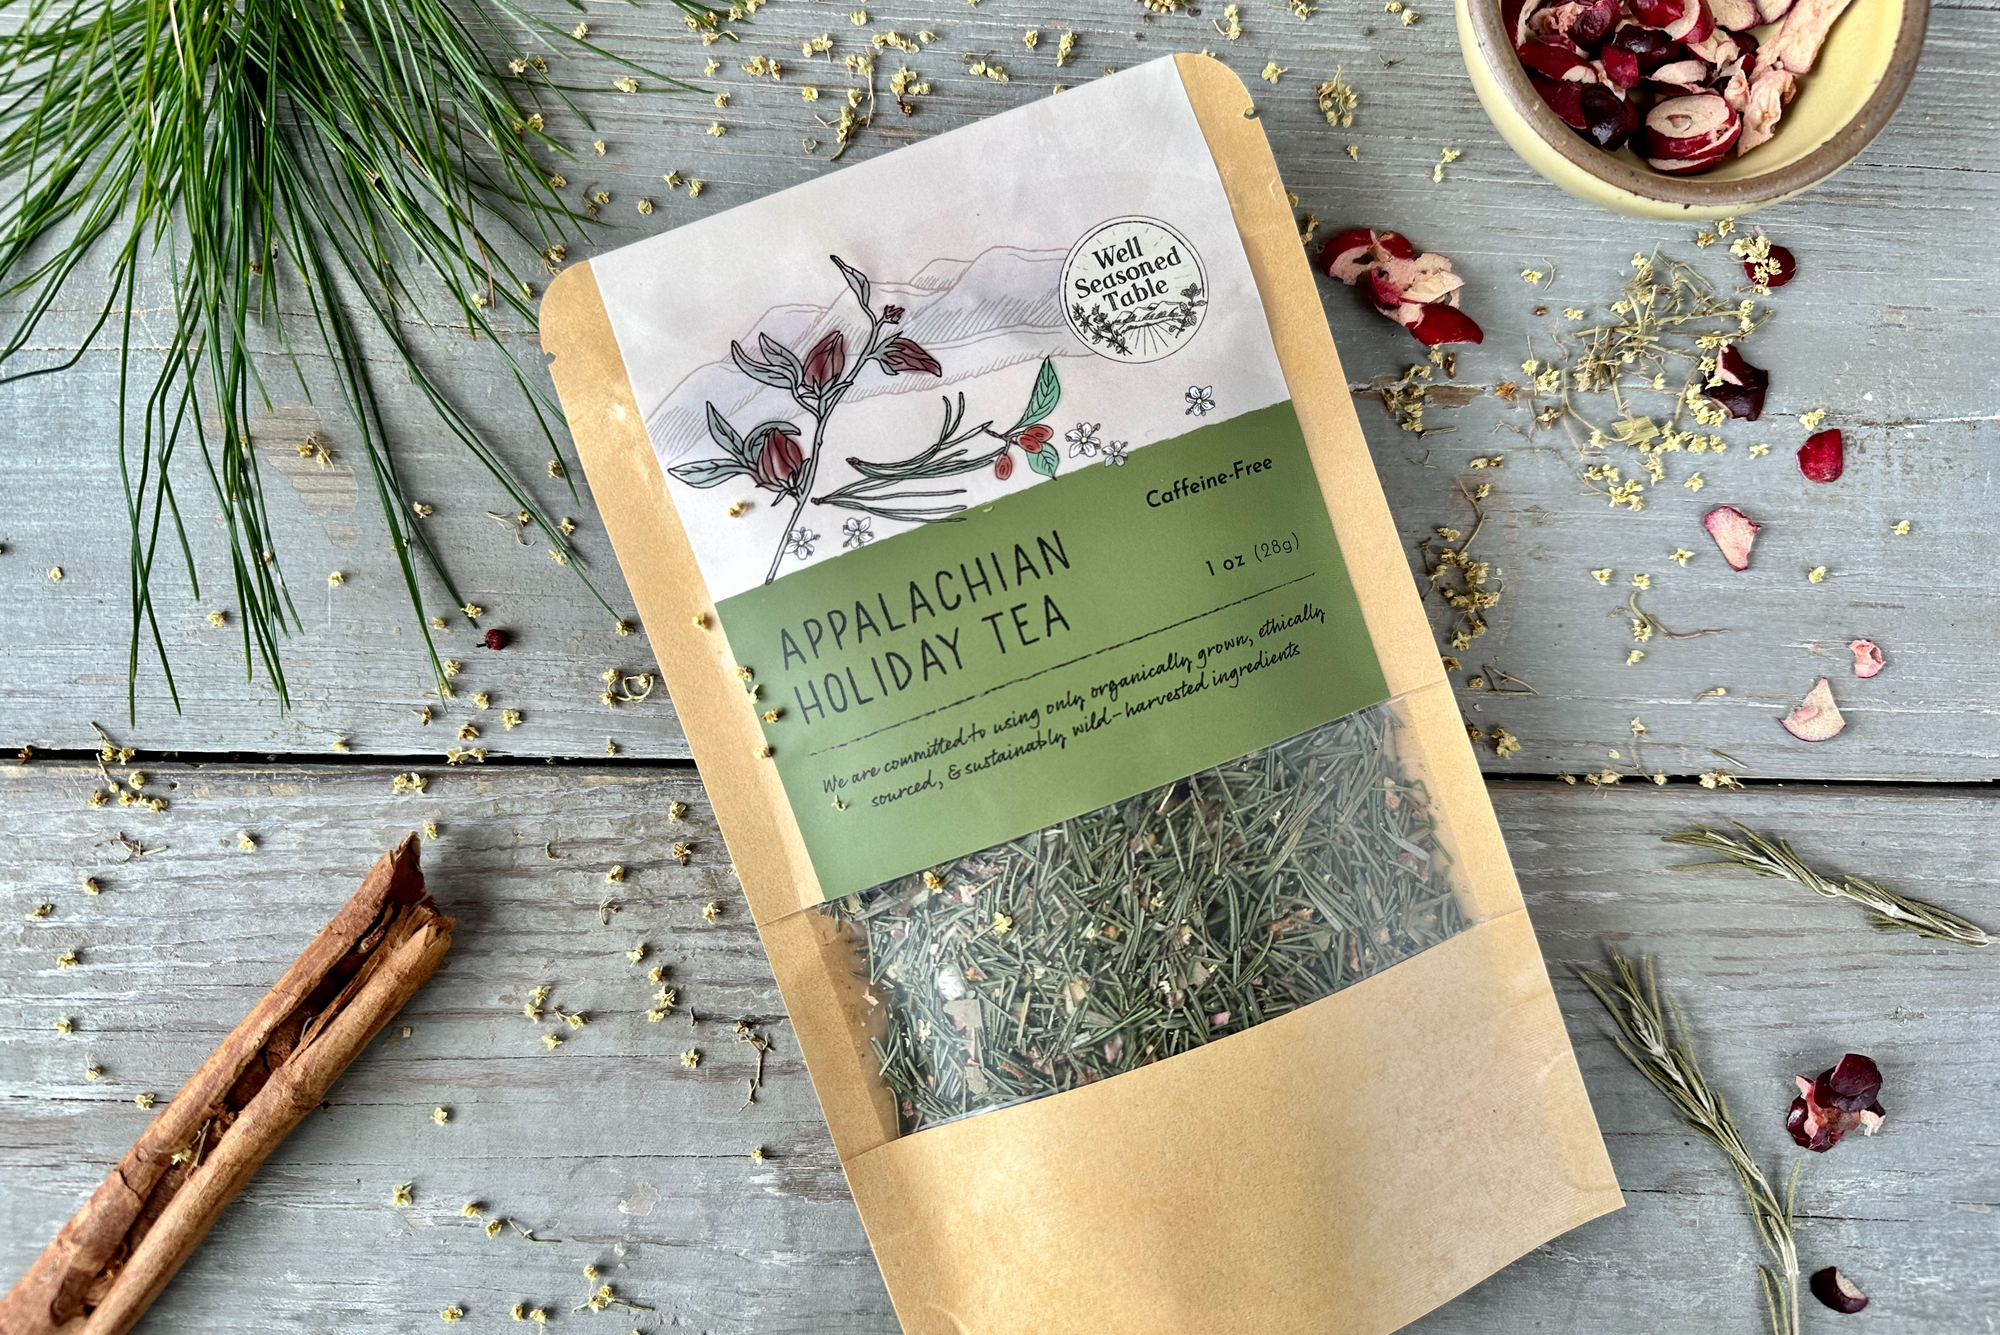 A packet of Appalachian Holiday Tea from Well Seasoned Table on a wooden background with pine needles, dried cranberries, cinnamon, and elder flowers around it.